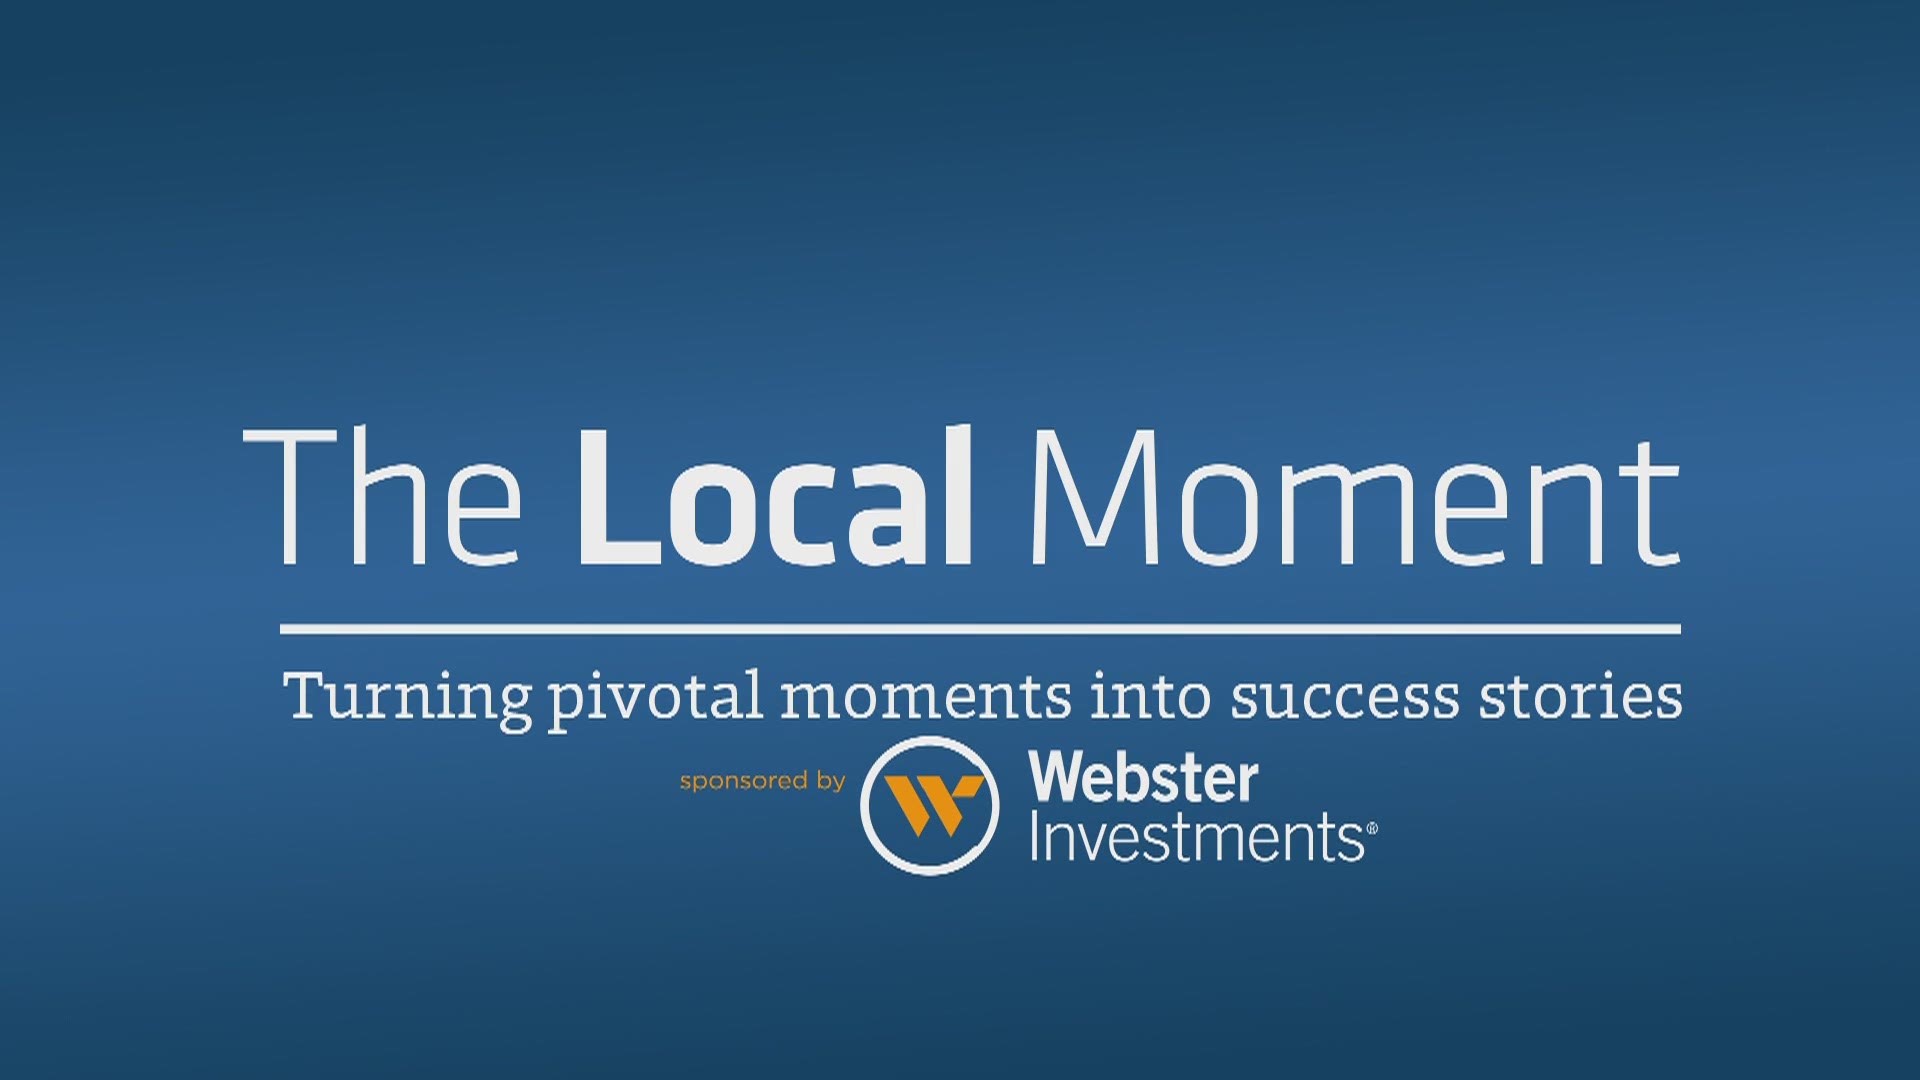 The Local Moment sponsored by Webster Investments talks about the importance of following your financial plan.